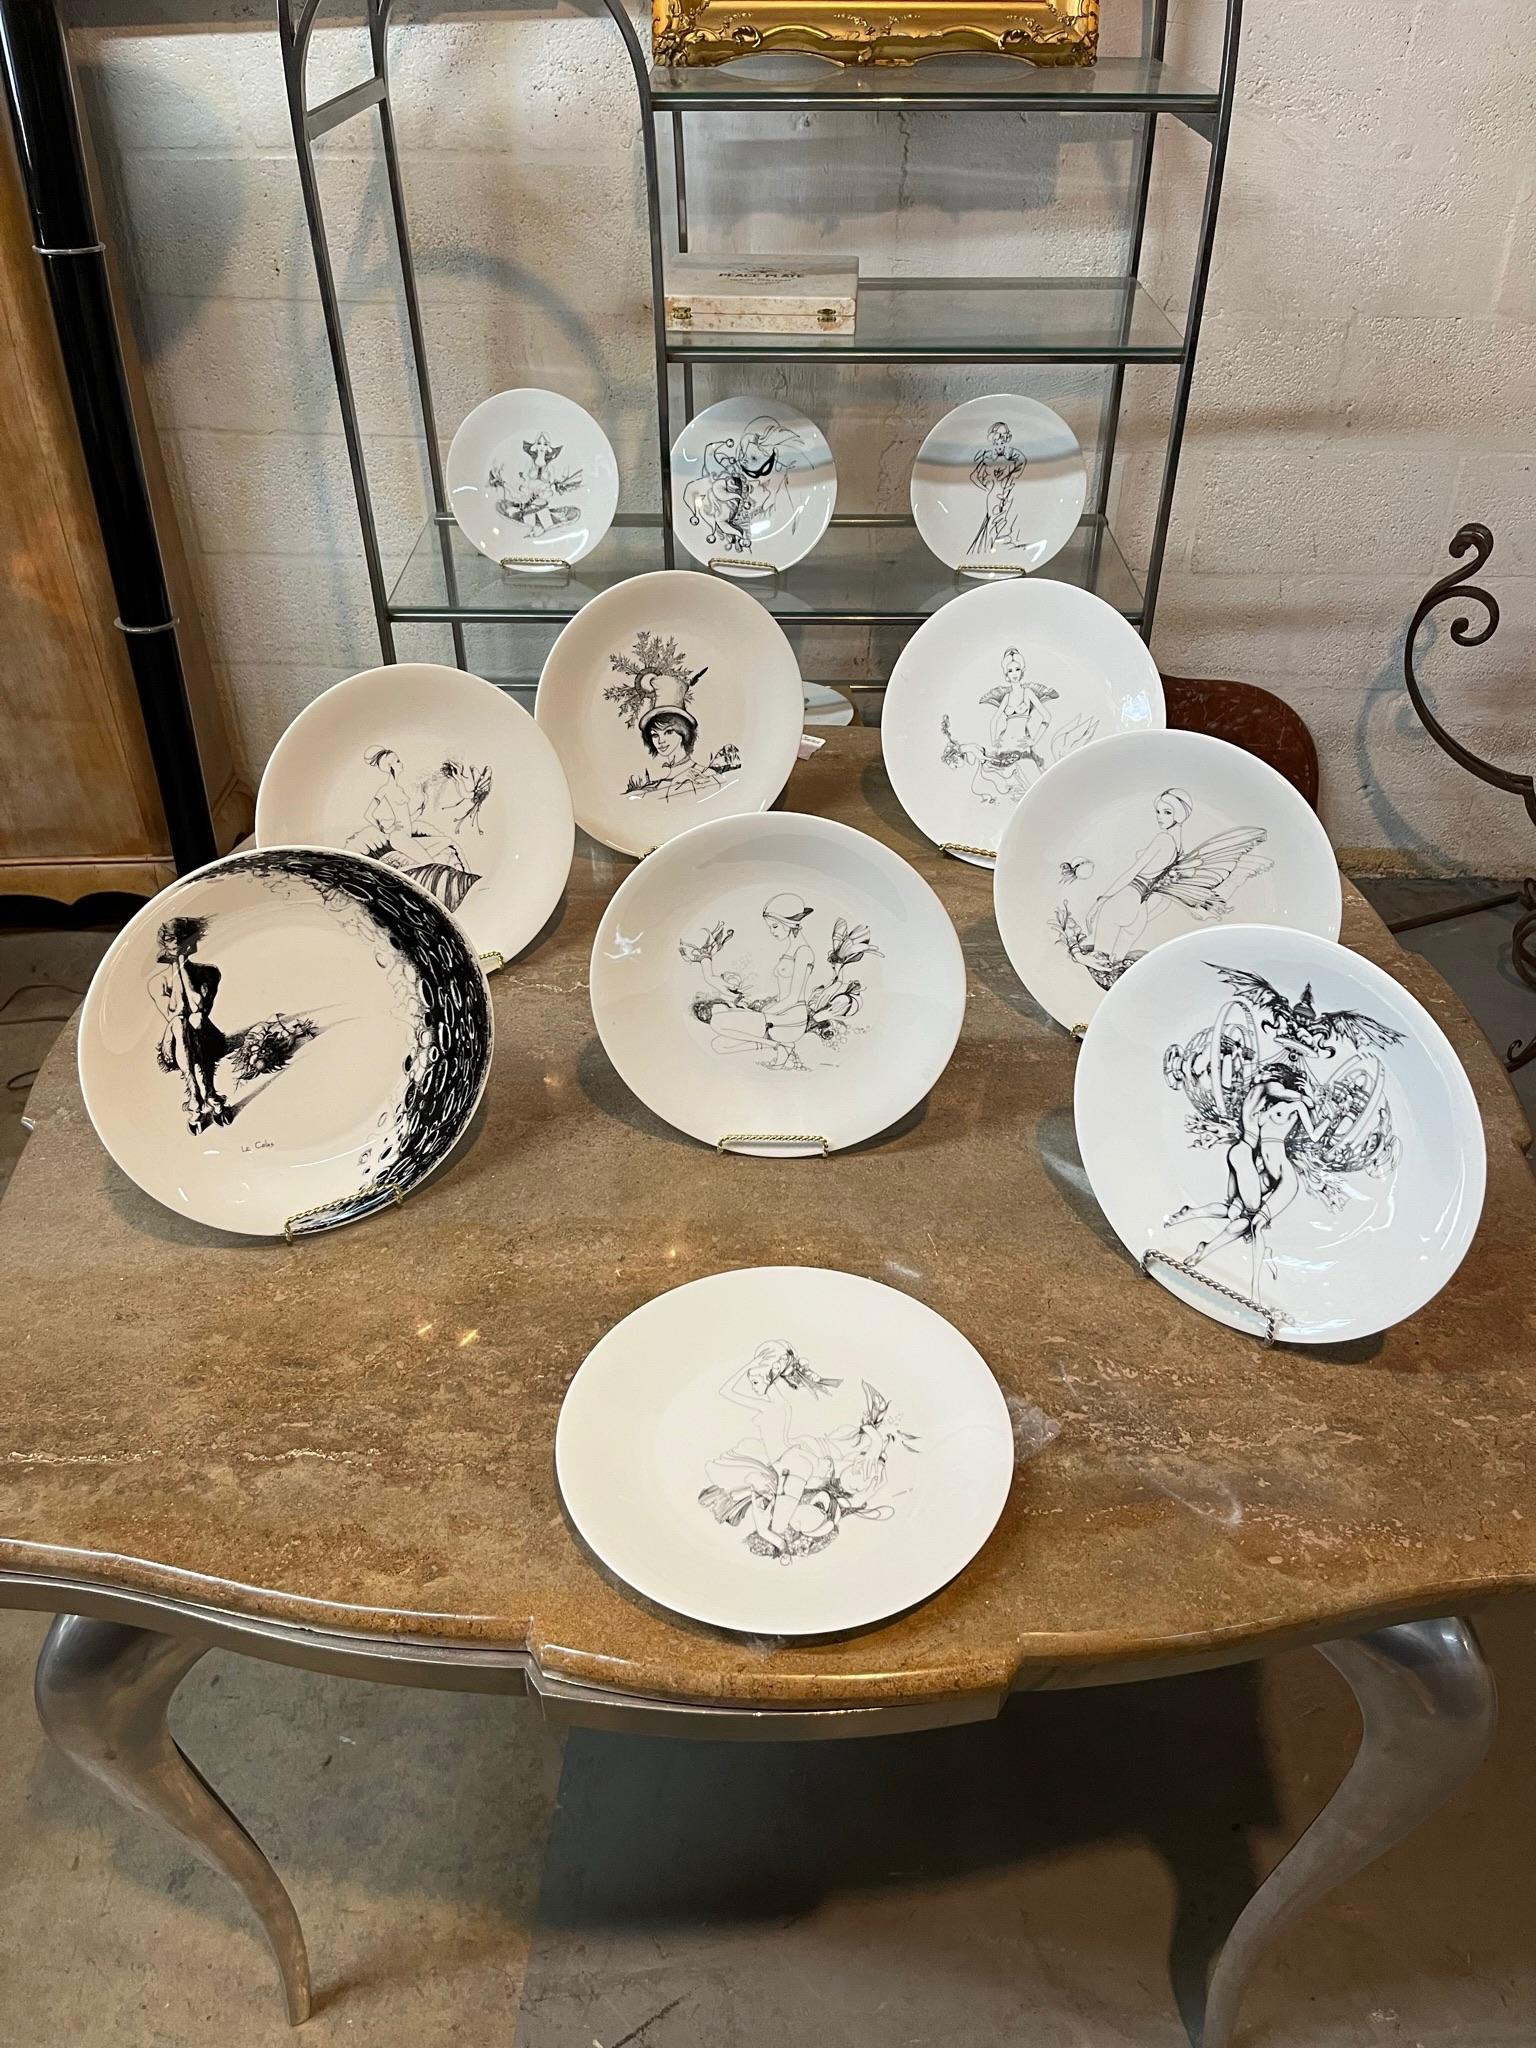 Porcelain  Hand Painted Plates by Well-Known Artist Limited Edition In Excellent Condition For Sale In Miami, FL